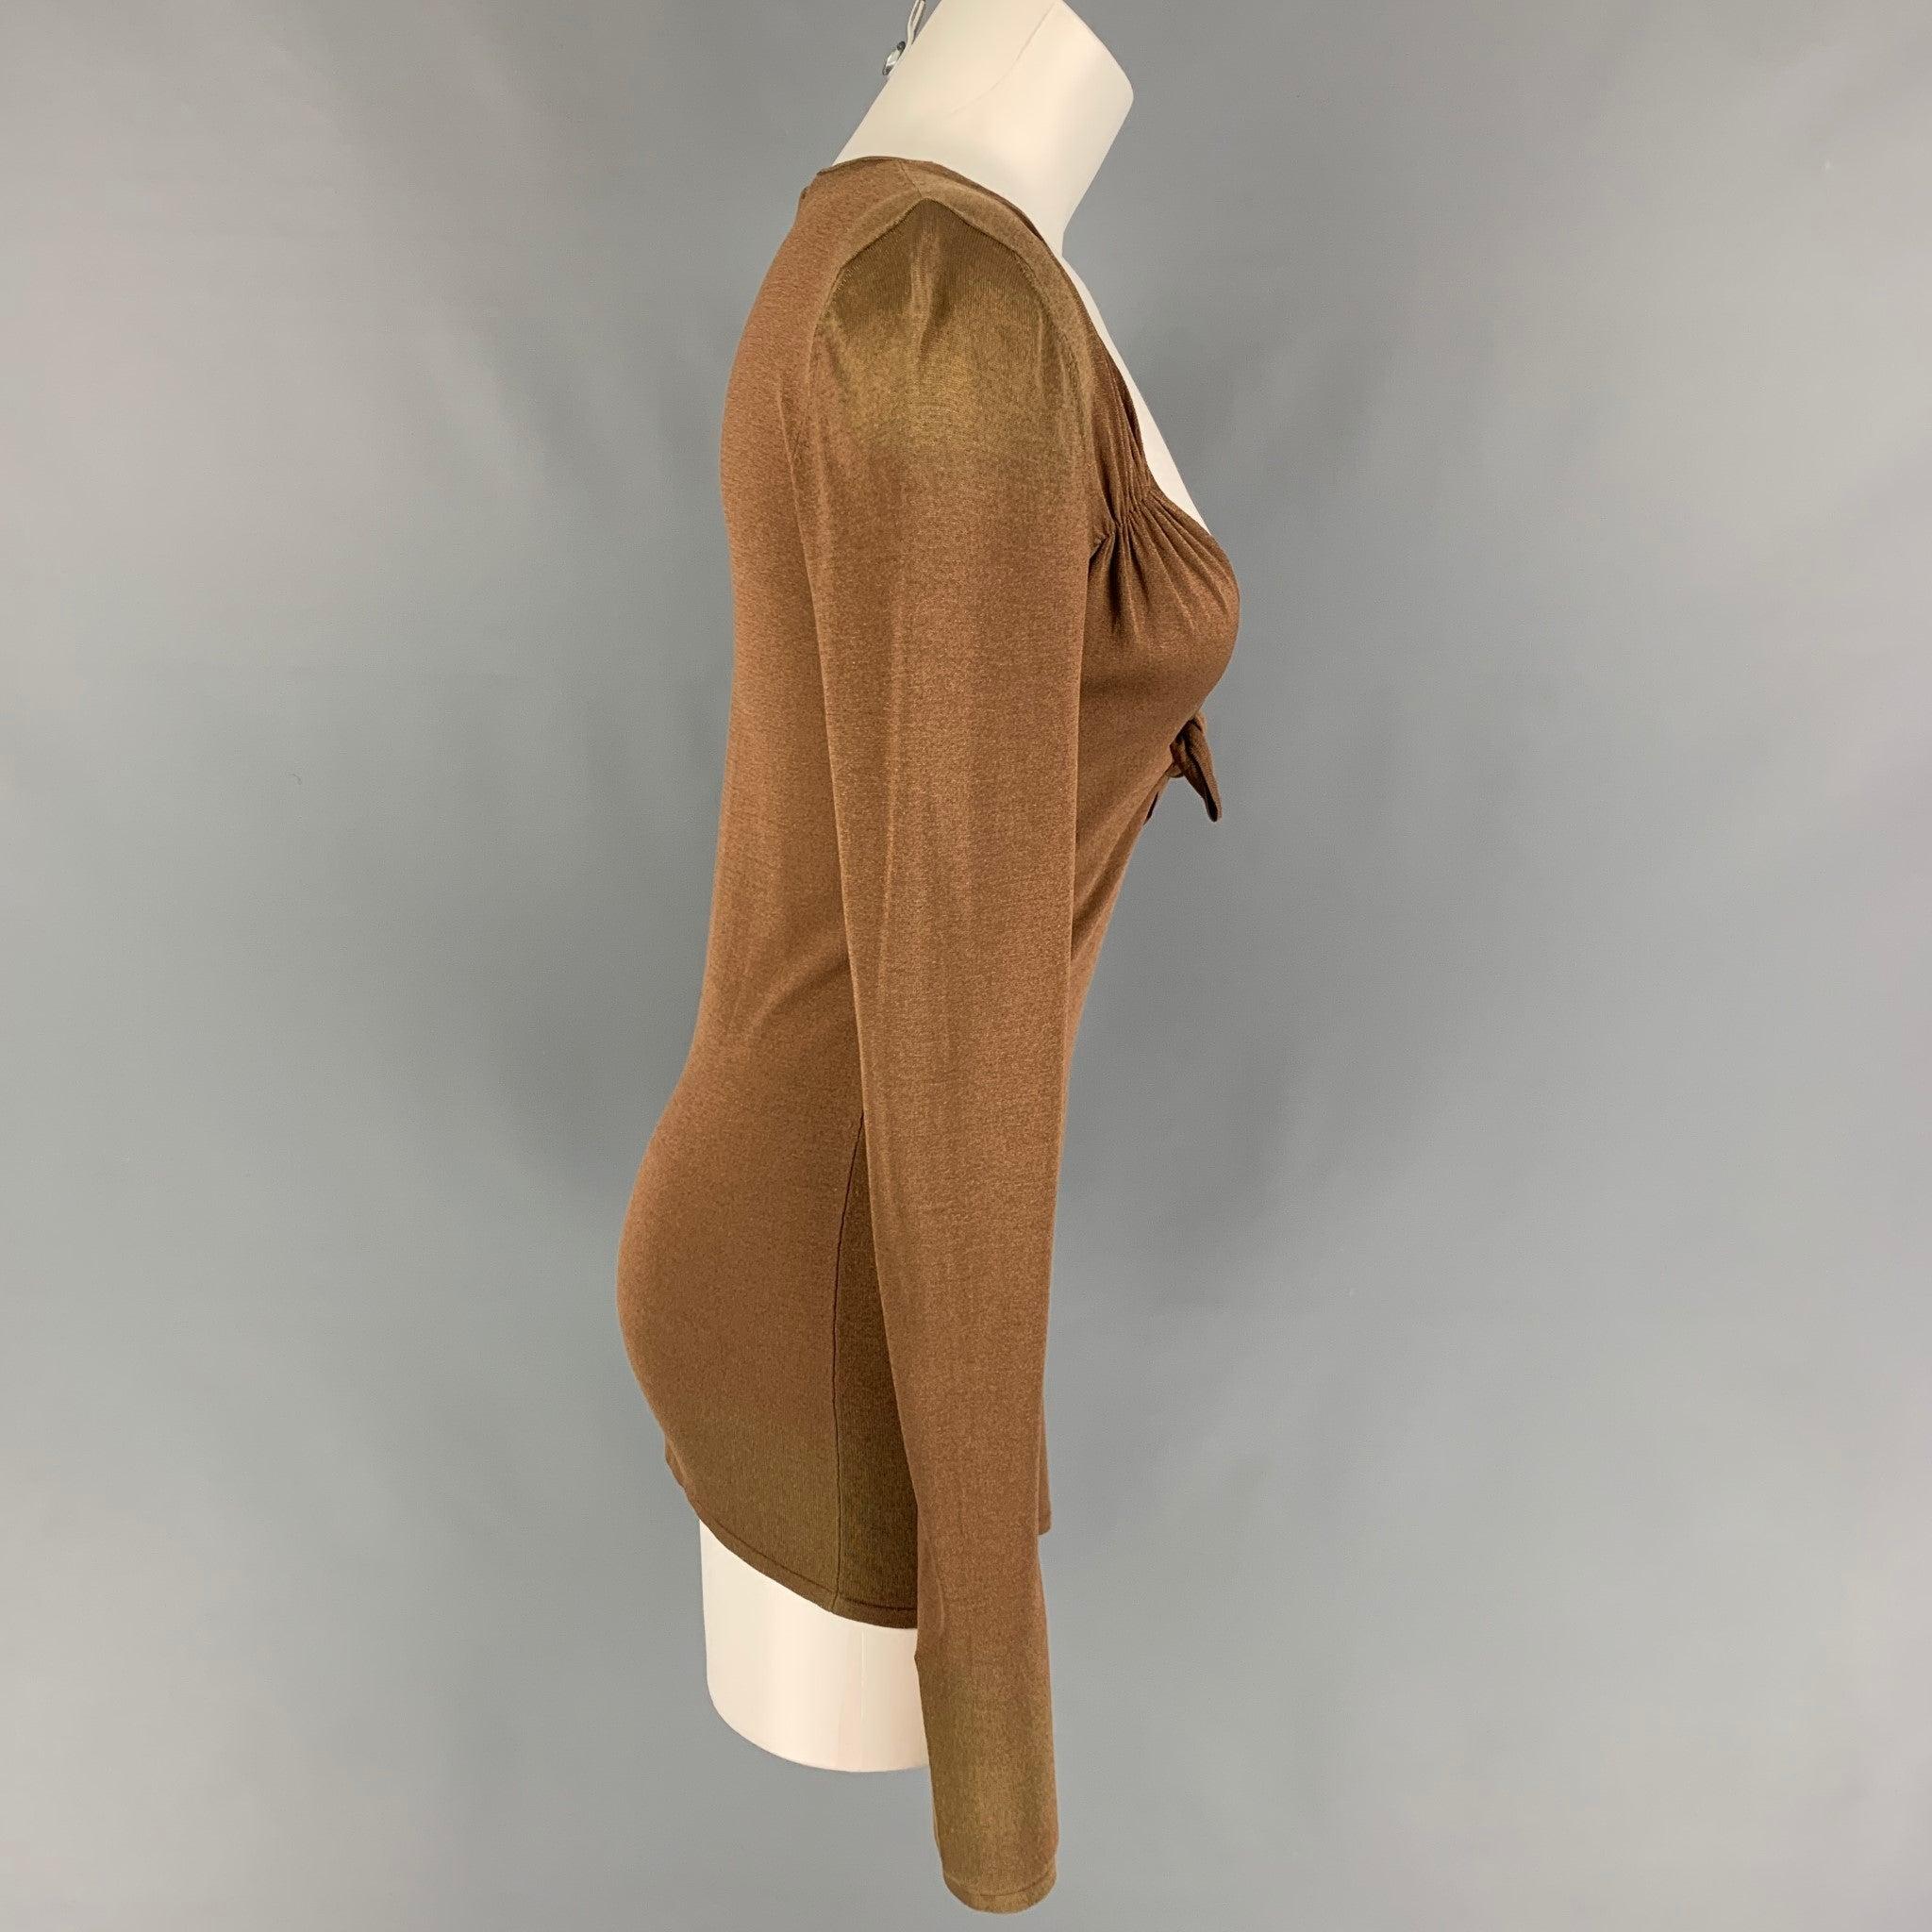 GUCCI pullover comes in a copper silk blend featuring a deep v-neck, front self-tie detail, and long sleeves. Made in Italy.
Good
Pre-Owned Condition. Moderate discoloration at right shoulder, right sleeve, and right hem. As-Is.  

Marked:   S